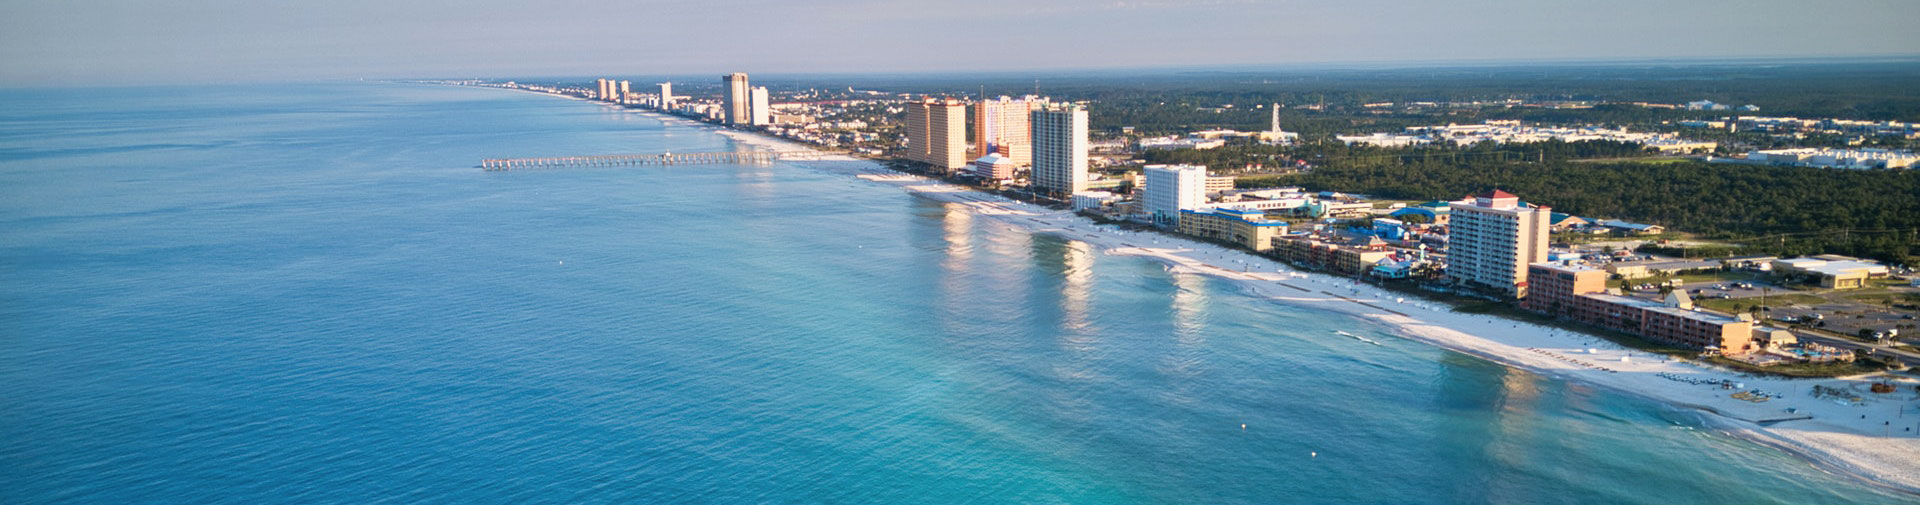 Selling NWFL | Real Estate Agent in Panama City Beach, FL